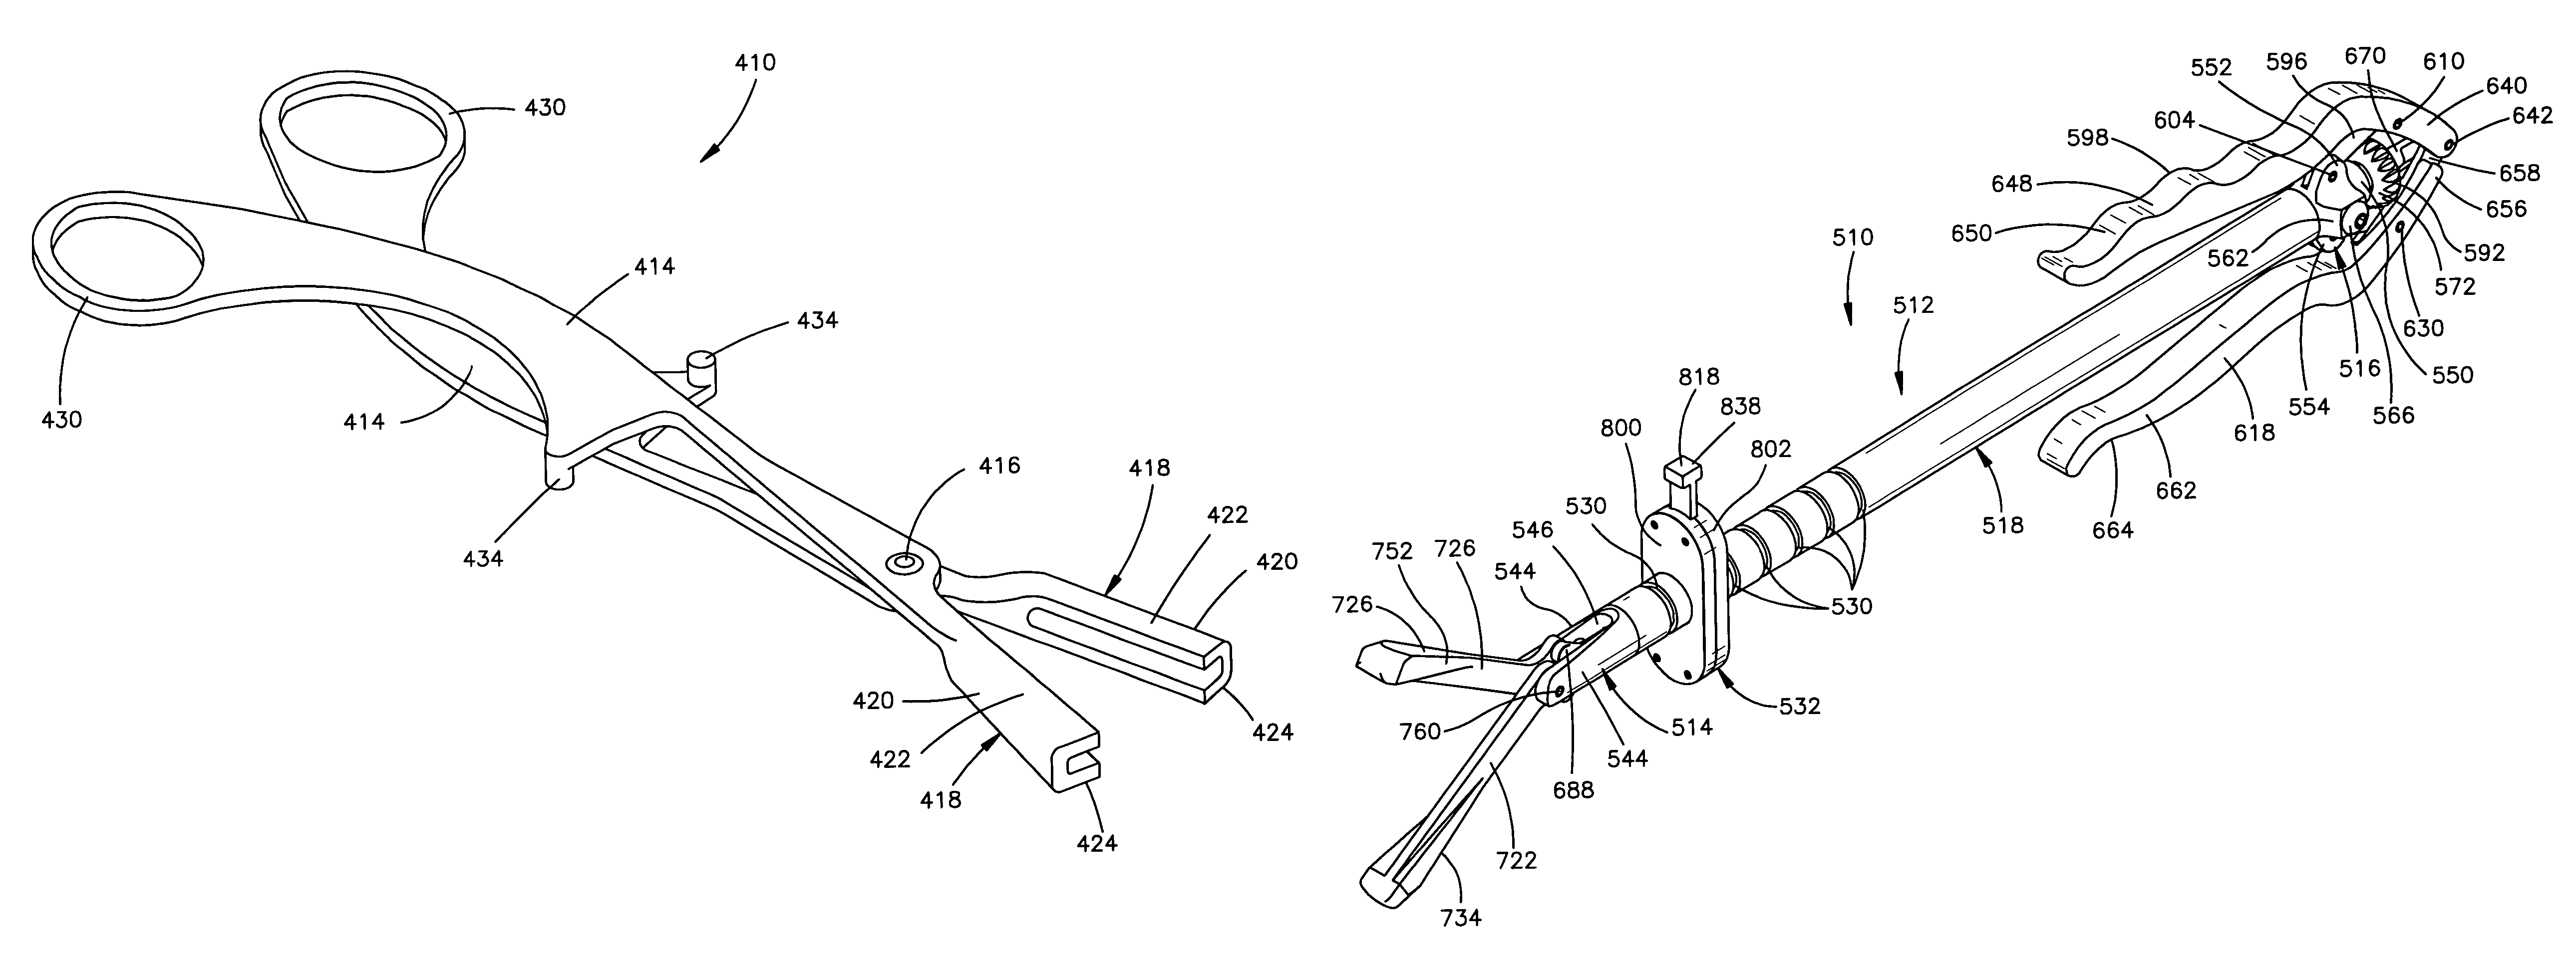 Surgical tool for use in expanding a cannula